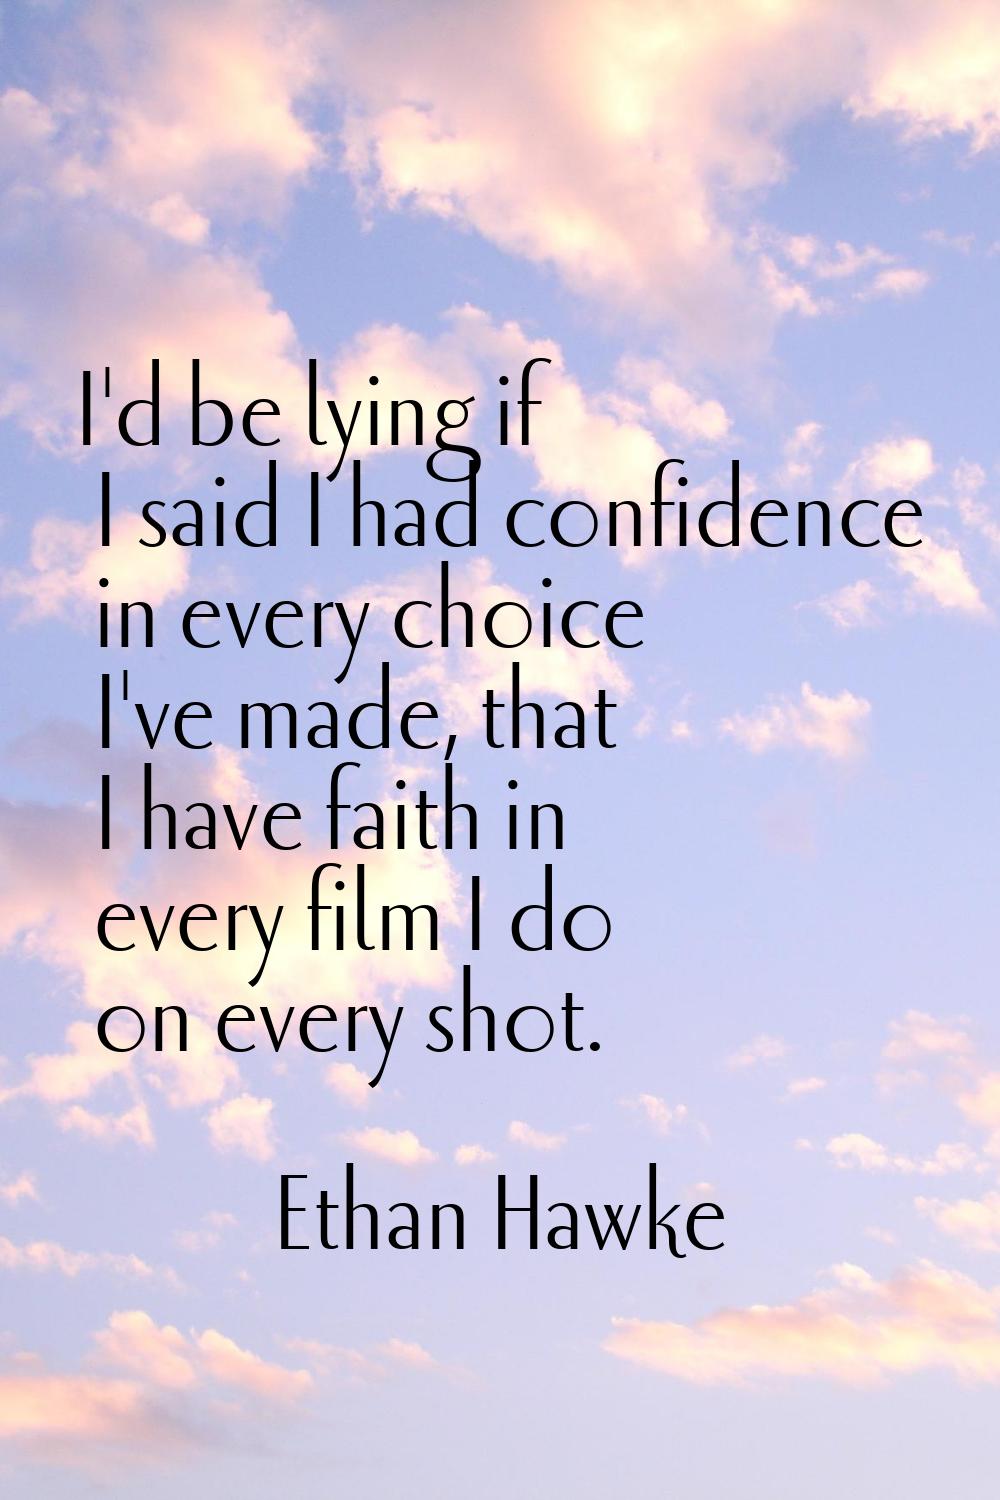 I'd be lying if I said I had confidence in every choice I've made, that I have faith in every film 